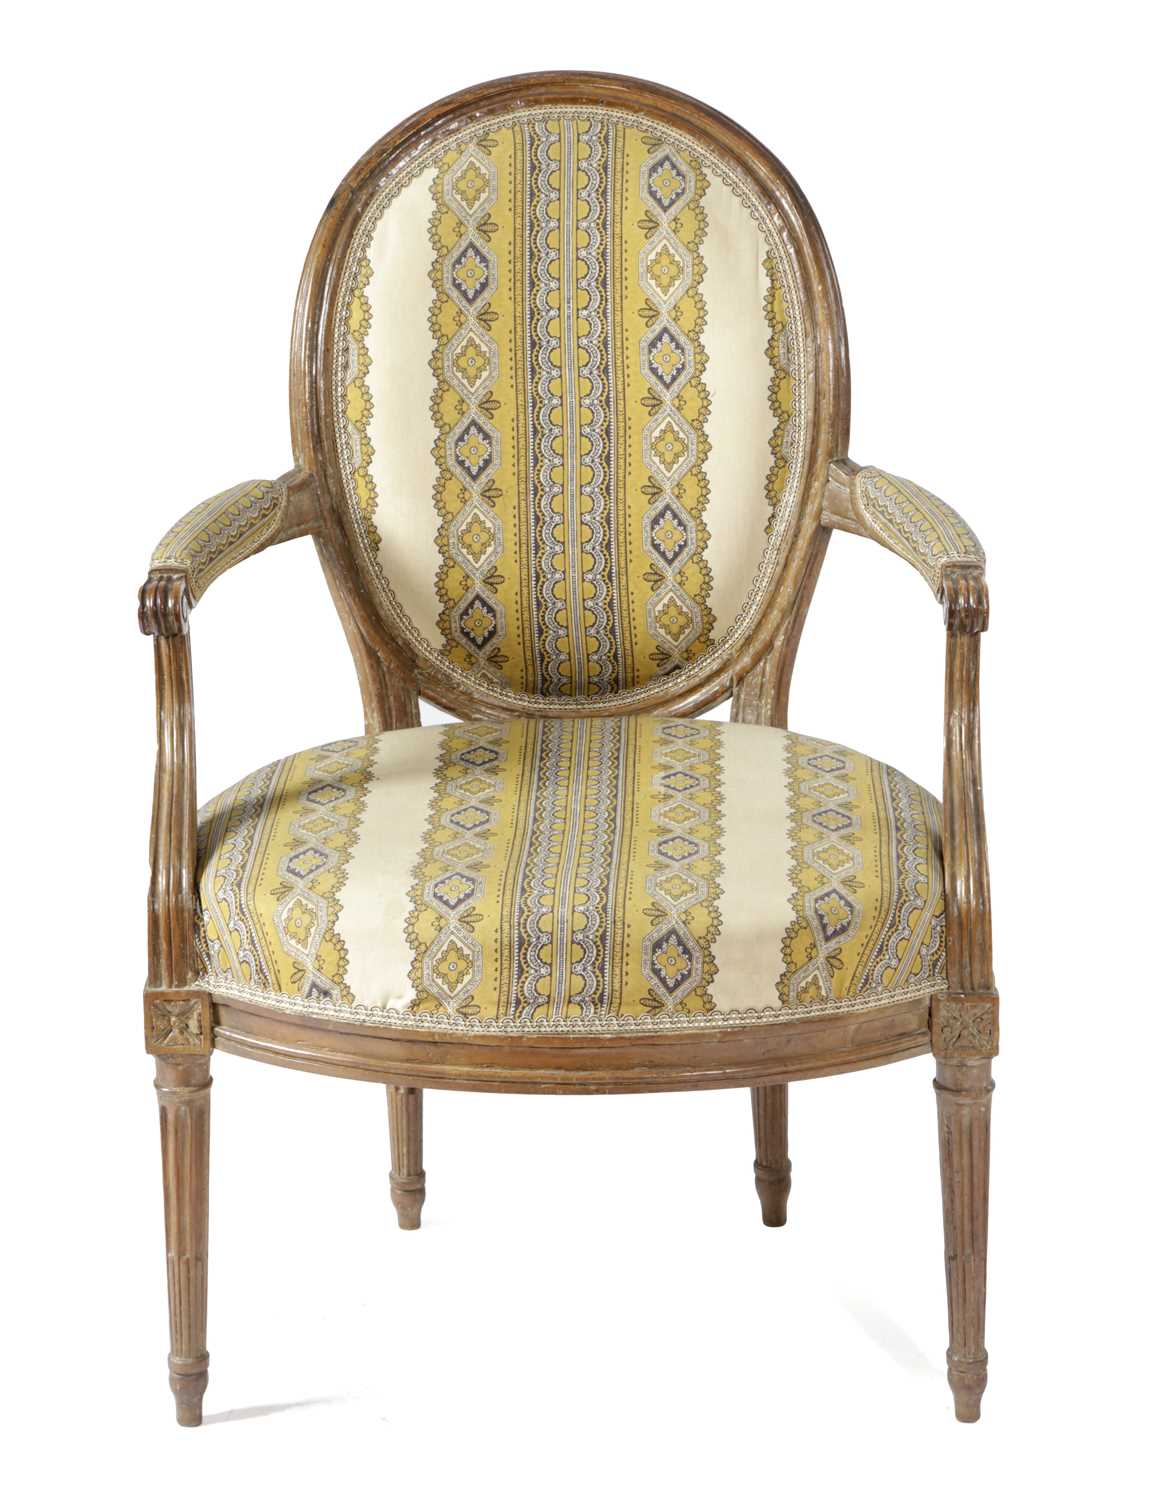 A FRENCH LOUIS XVI WALNUT FAUTEUIL 18TH CENTURY with an oval back and moulded frame, on stop-